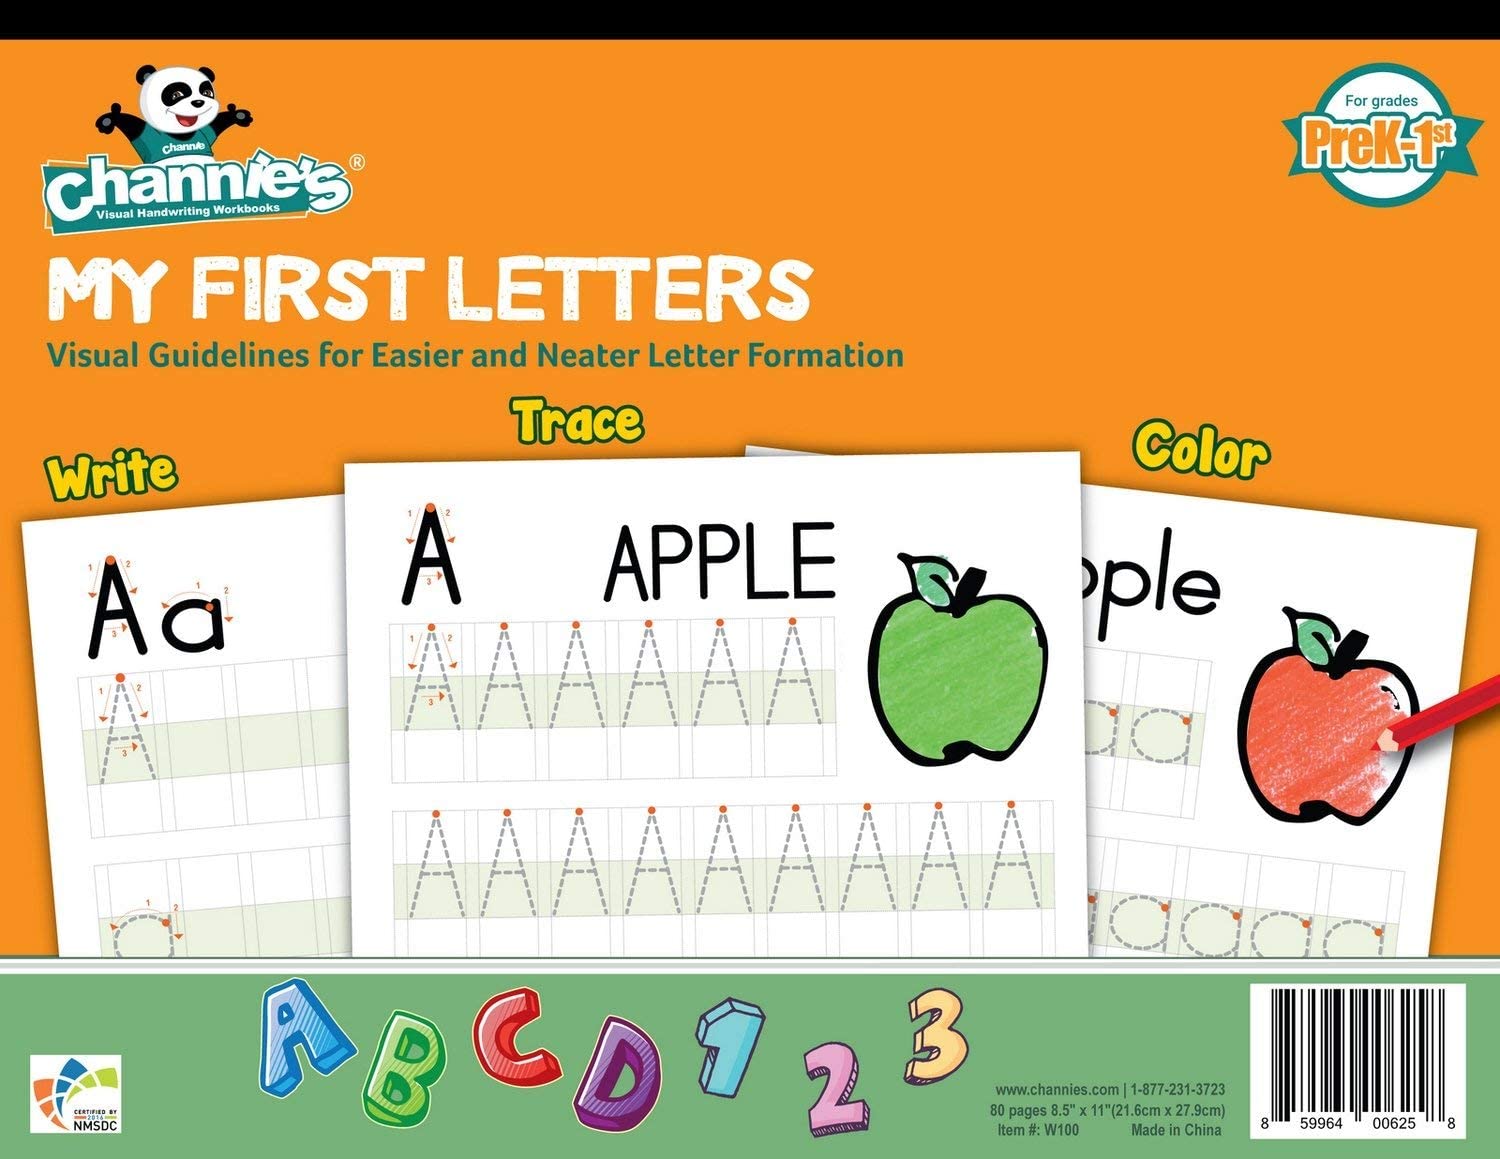 Channie’s Color-Coded Kindergarten Lined Writing Paper, 80-Pages